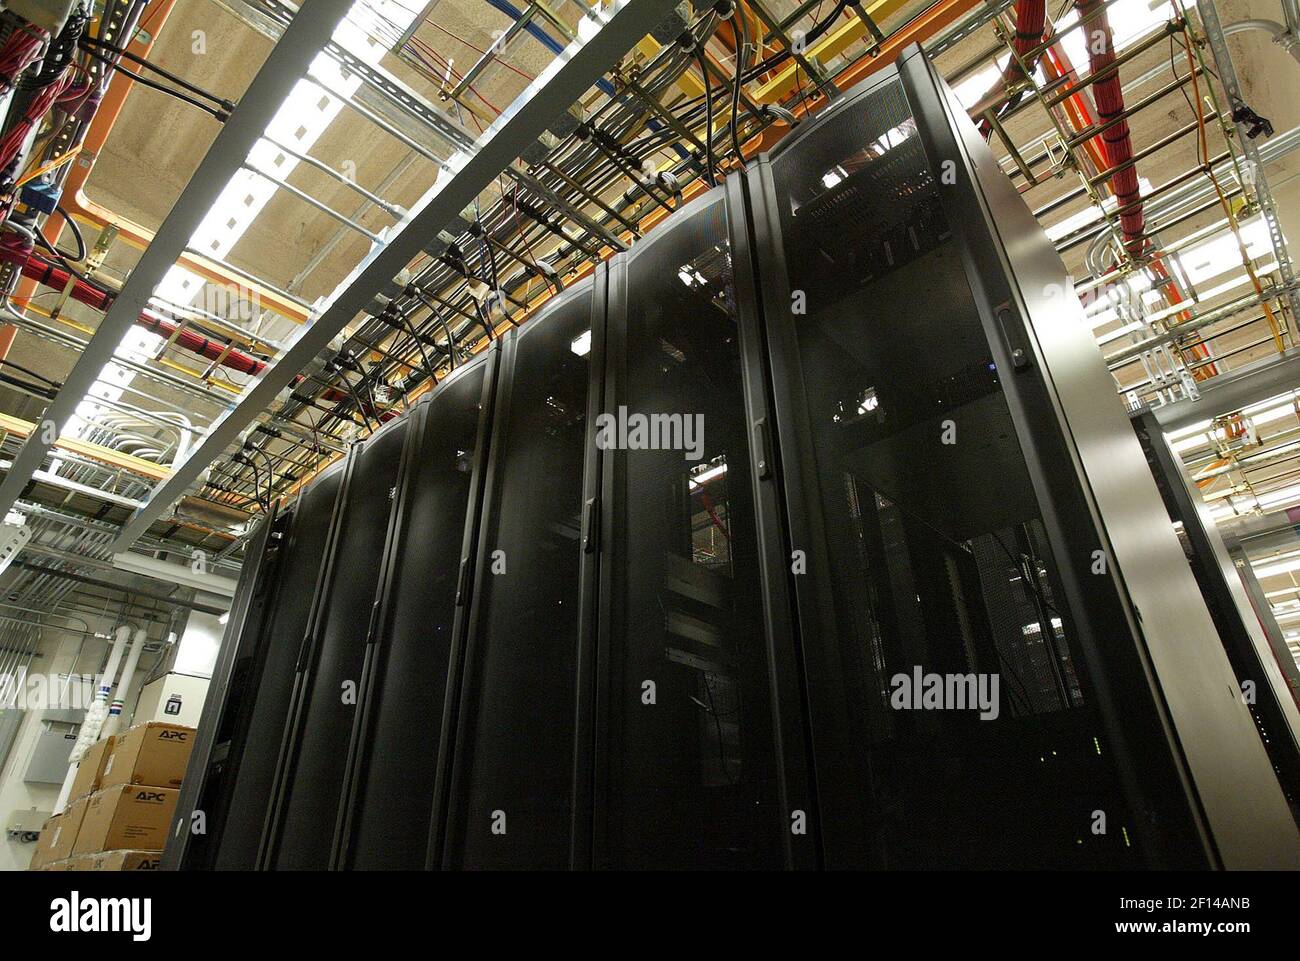 The Port of Seattle once had racks of servers. Using VMware's ESX Server, the Port has consolidated the majority of the physical servers that run its applications, things like e-mail routing, Web sites and records management, on 'virtual machines,' as shown. (Photo by Thomas James Hurst/Seattle Times/MCT/Sipa USA) Stock Photo